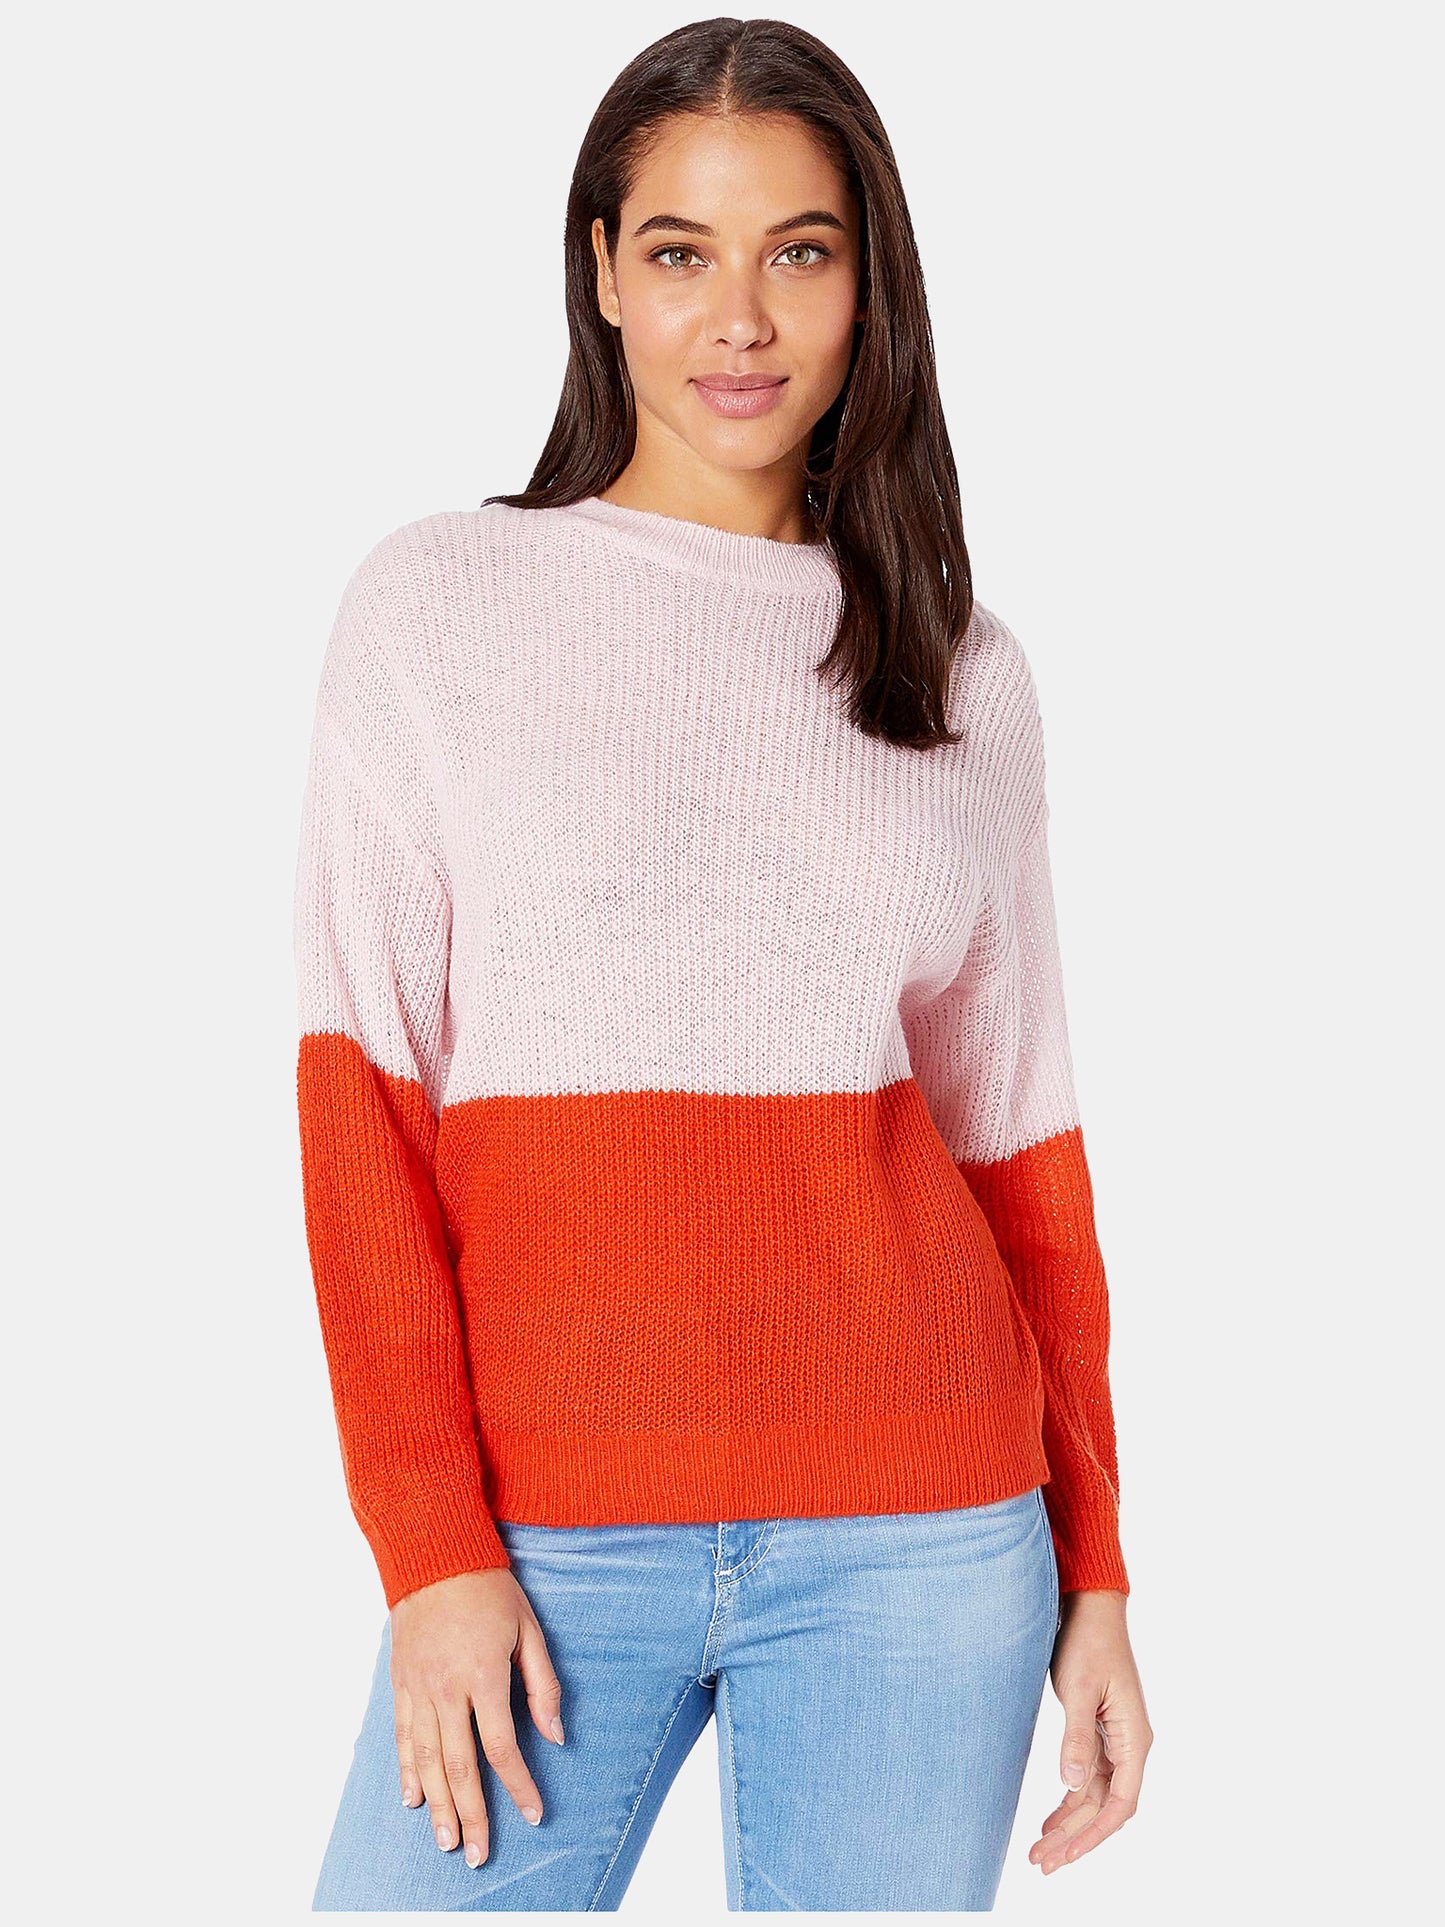 Cupcakes And Cashmere Women's Janus Sweater